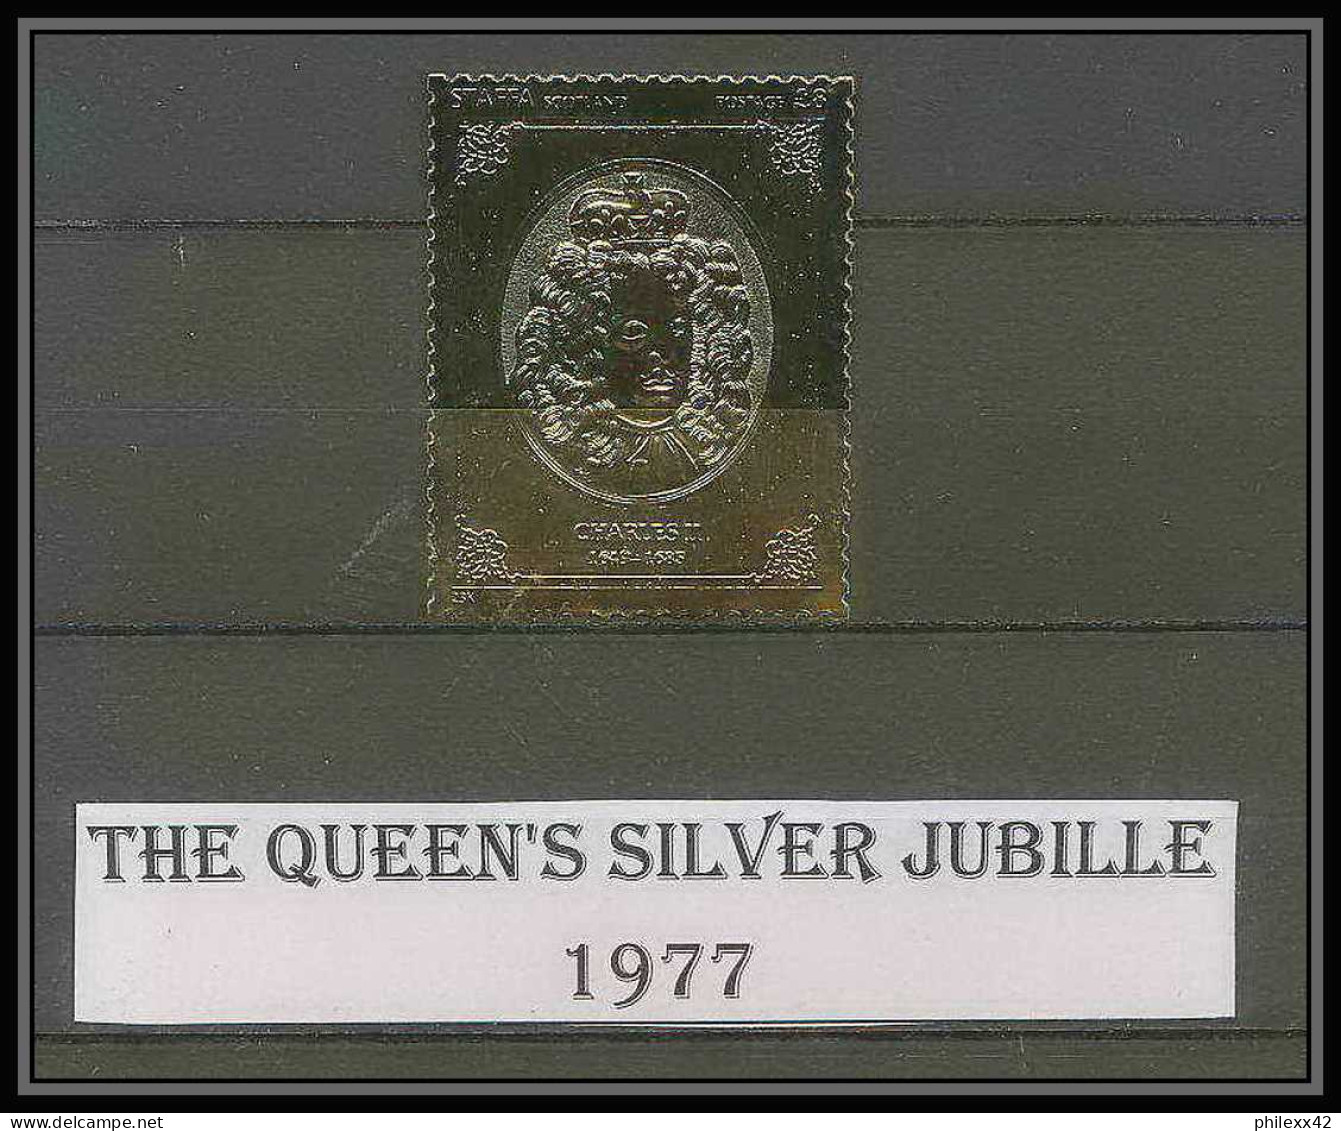 462 Staffa Scotland The Queen's Silver Jubilee 1977 OR Gold Stamps Monarchy United Kingdom Charles 2 Type 2 Neuf** Mnh - Ecosse